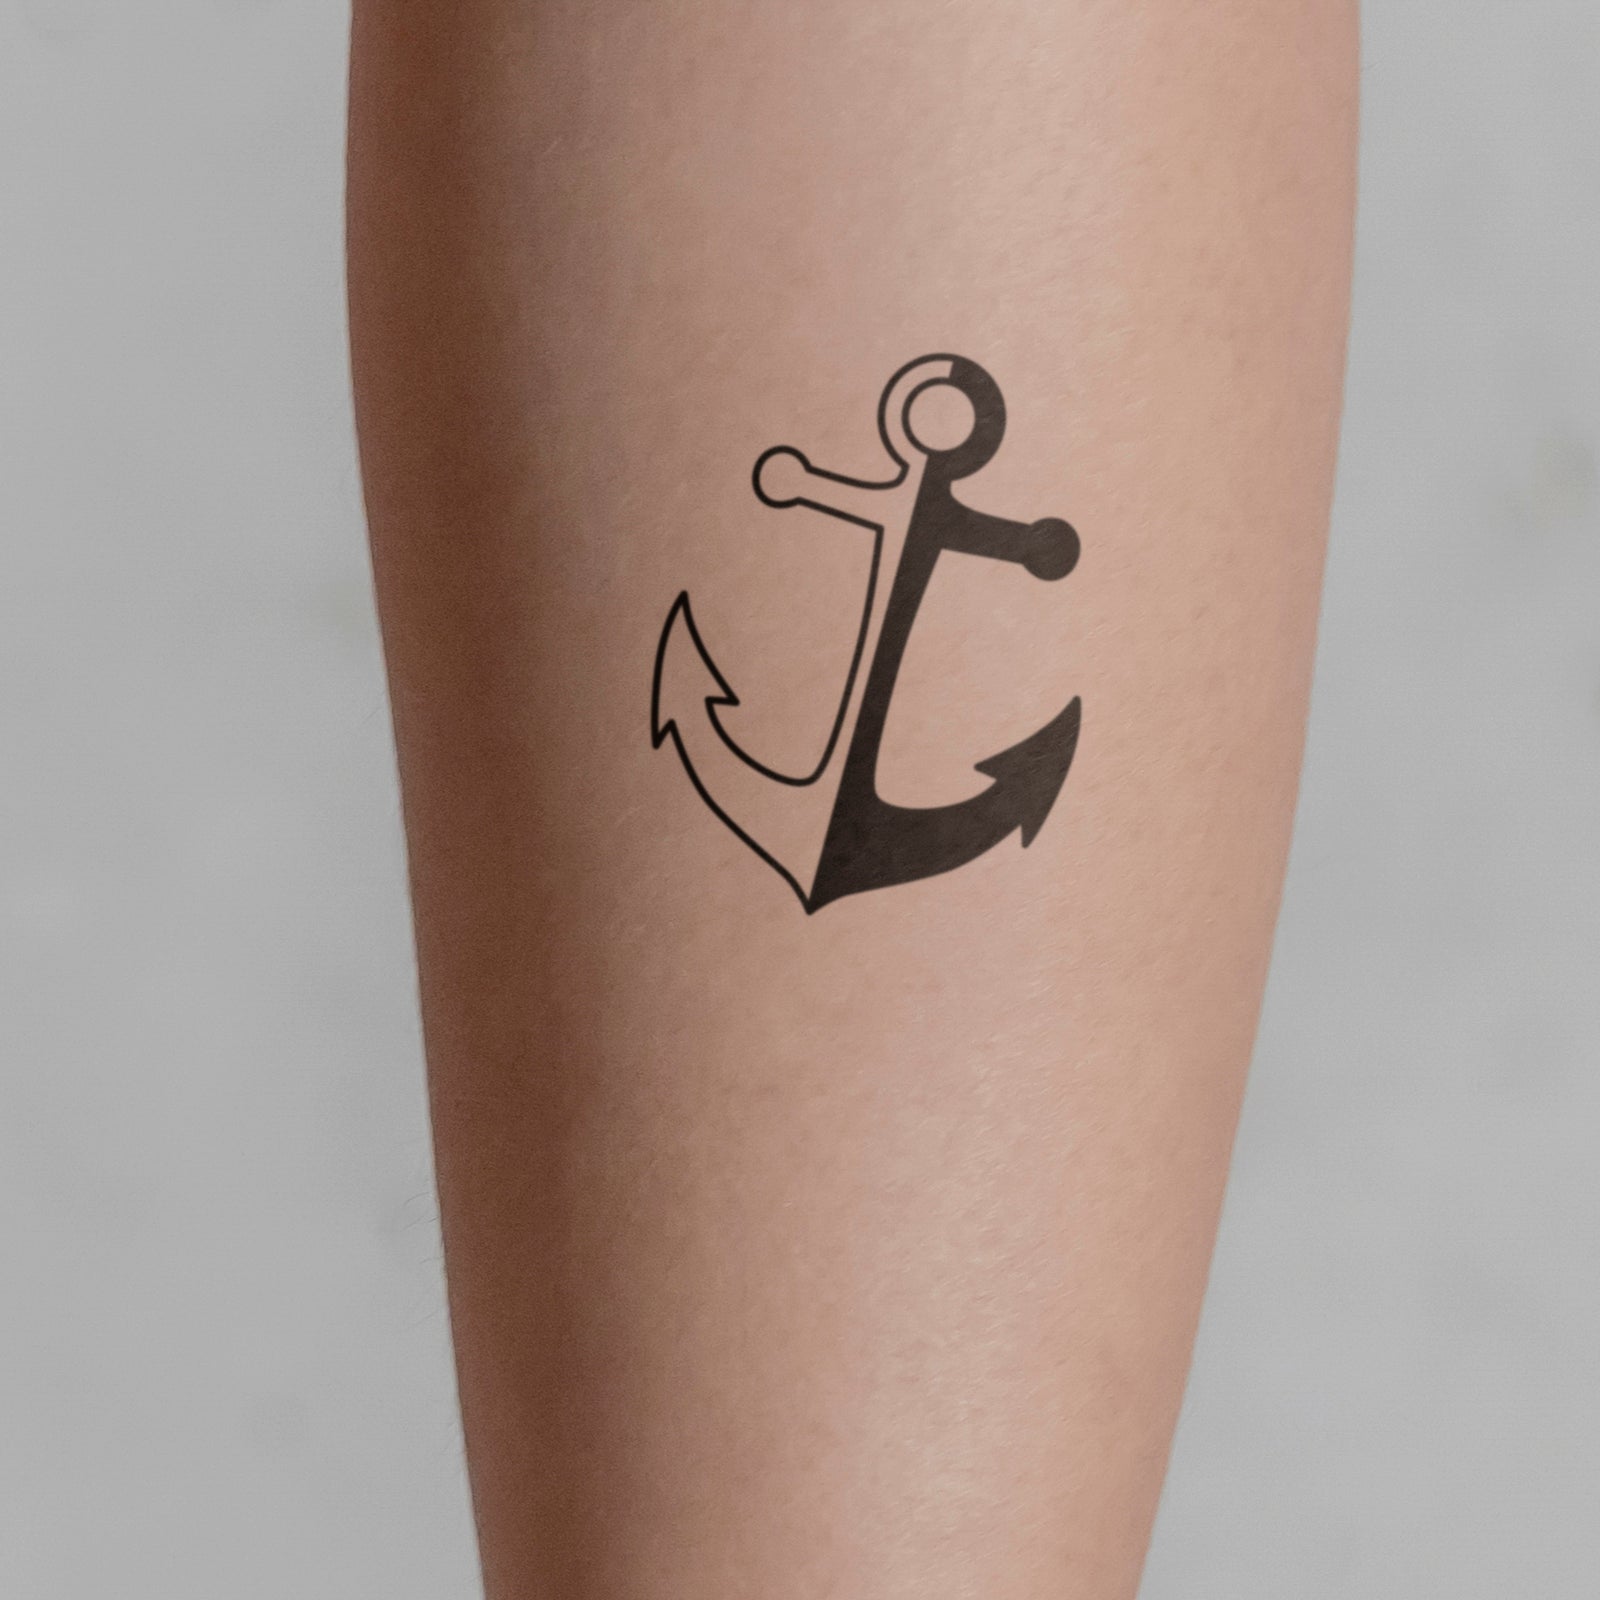 10 year old anchor tattoo : r/agedtattoos